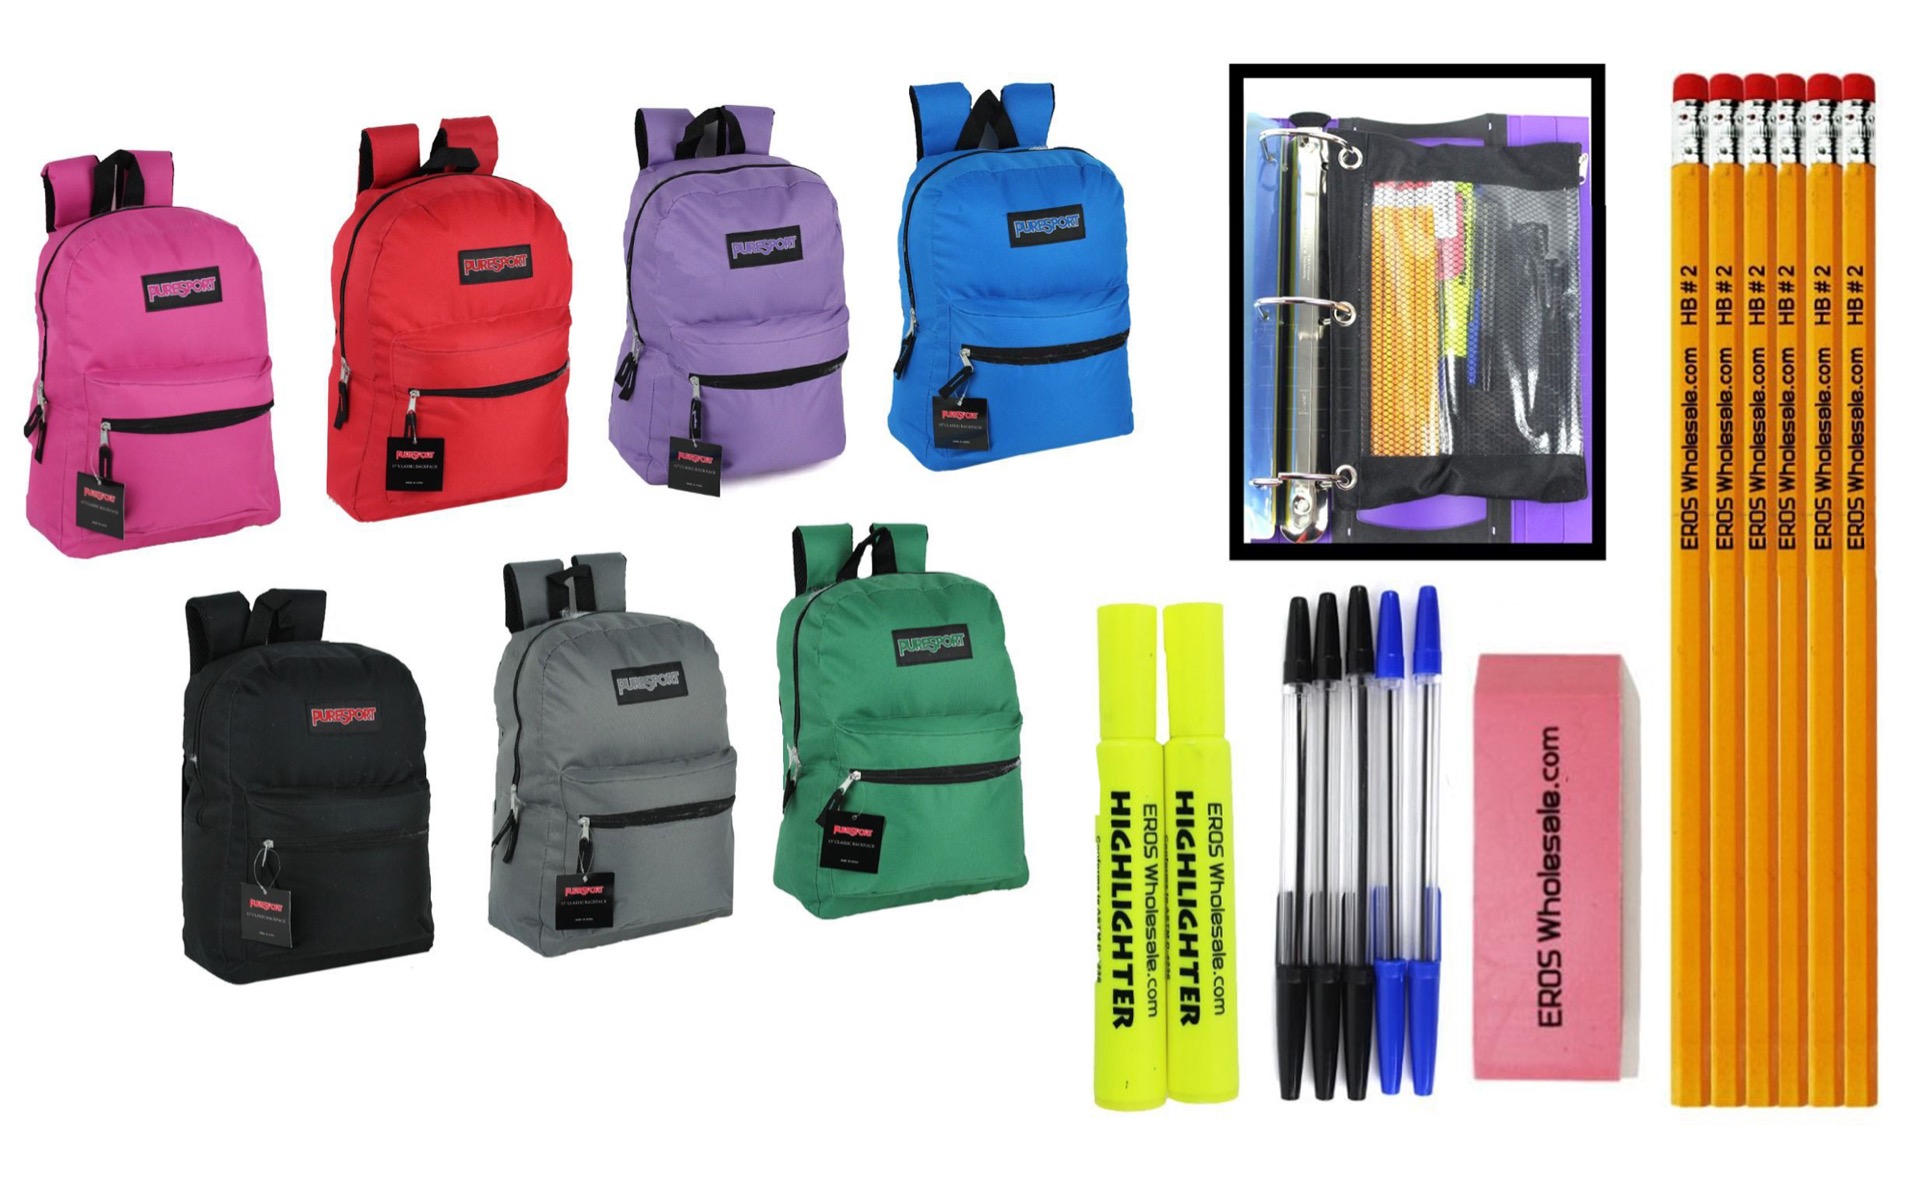 24 Wholesale Bulk Pencil Pouches In 4 Assorted Colors - at